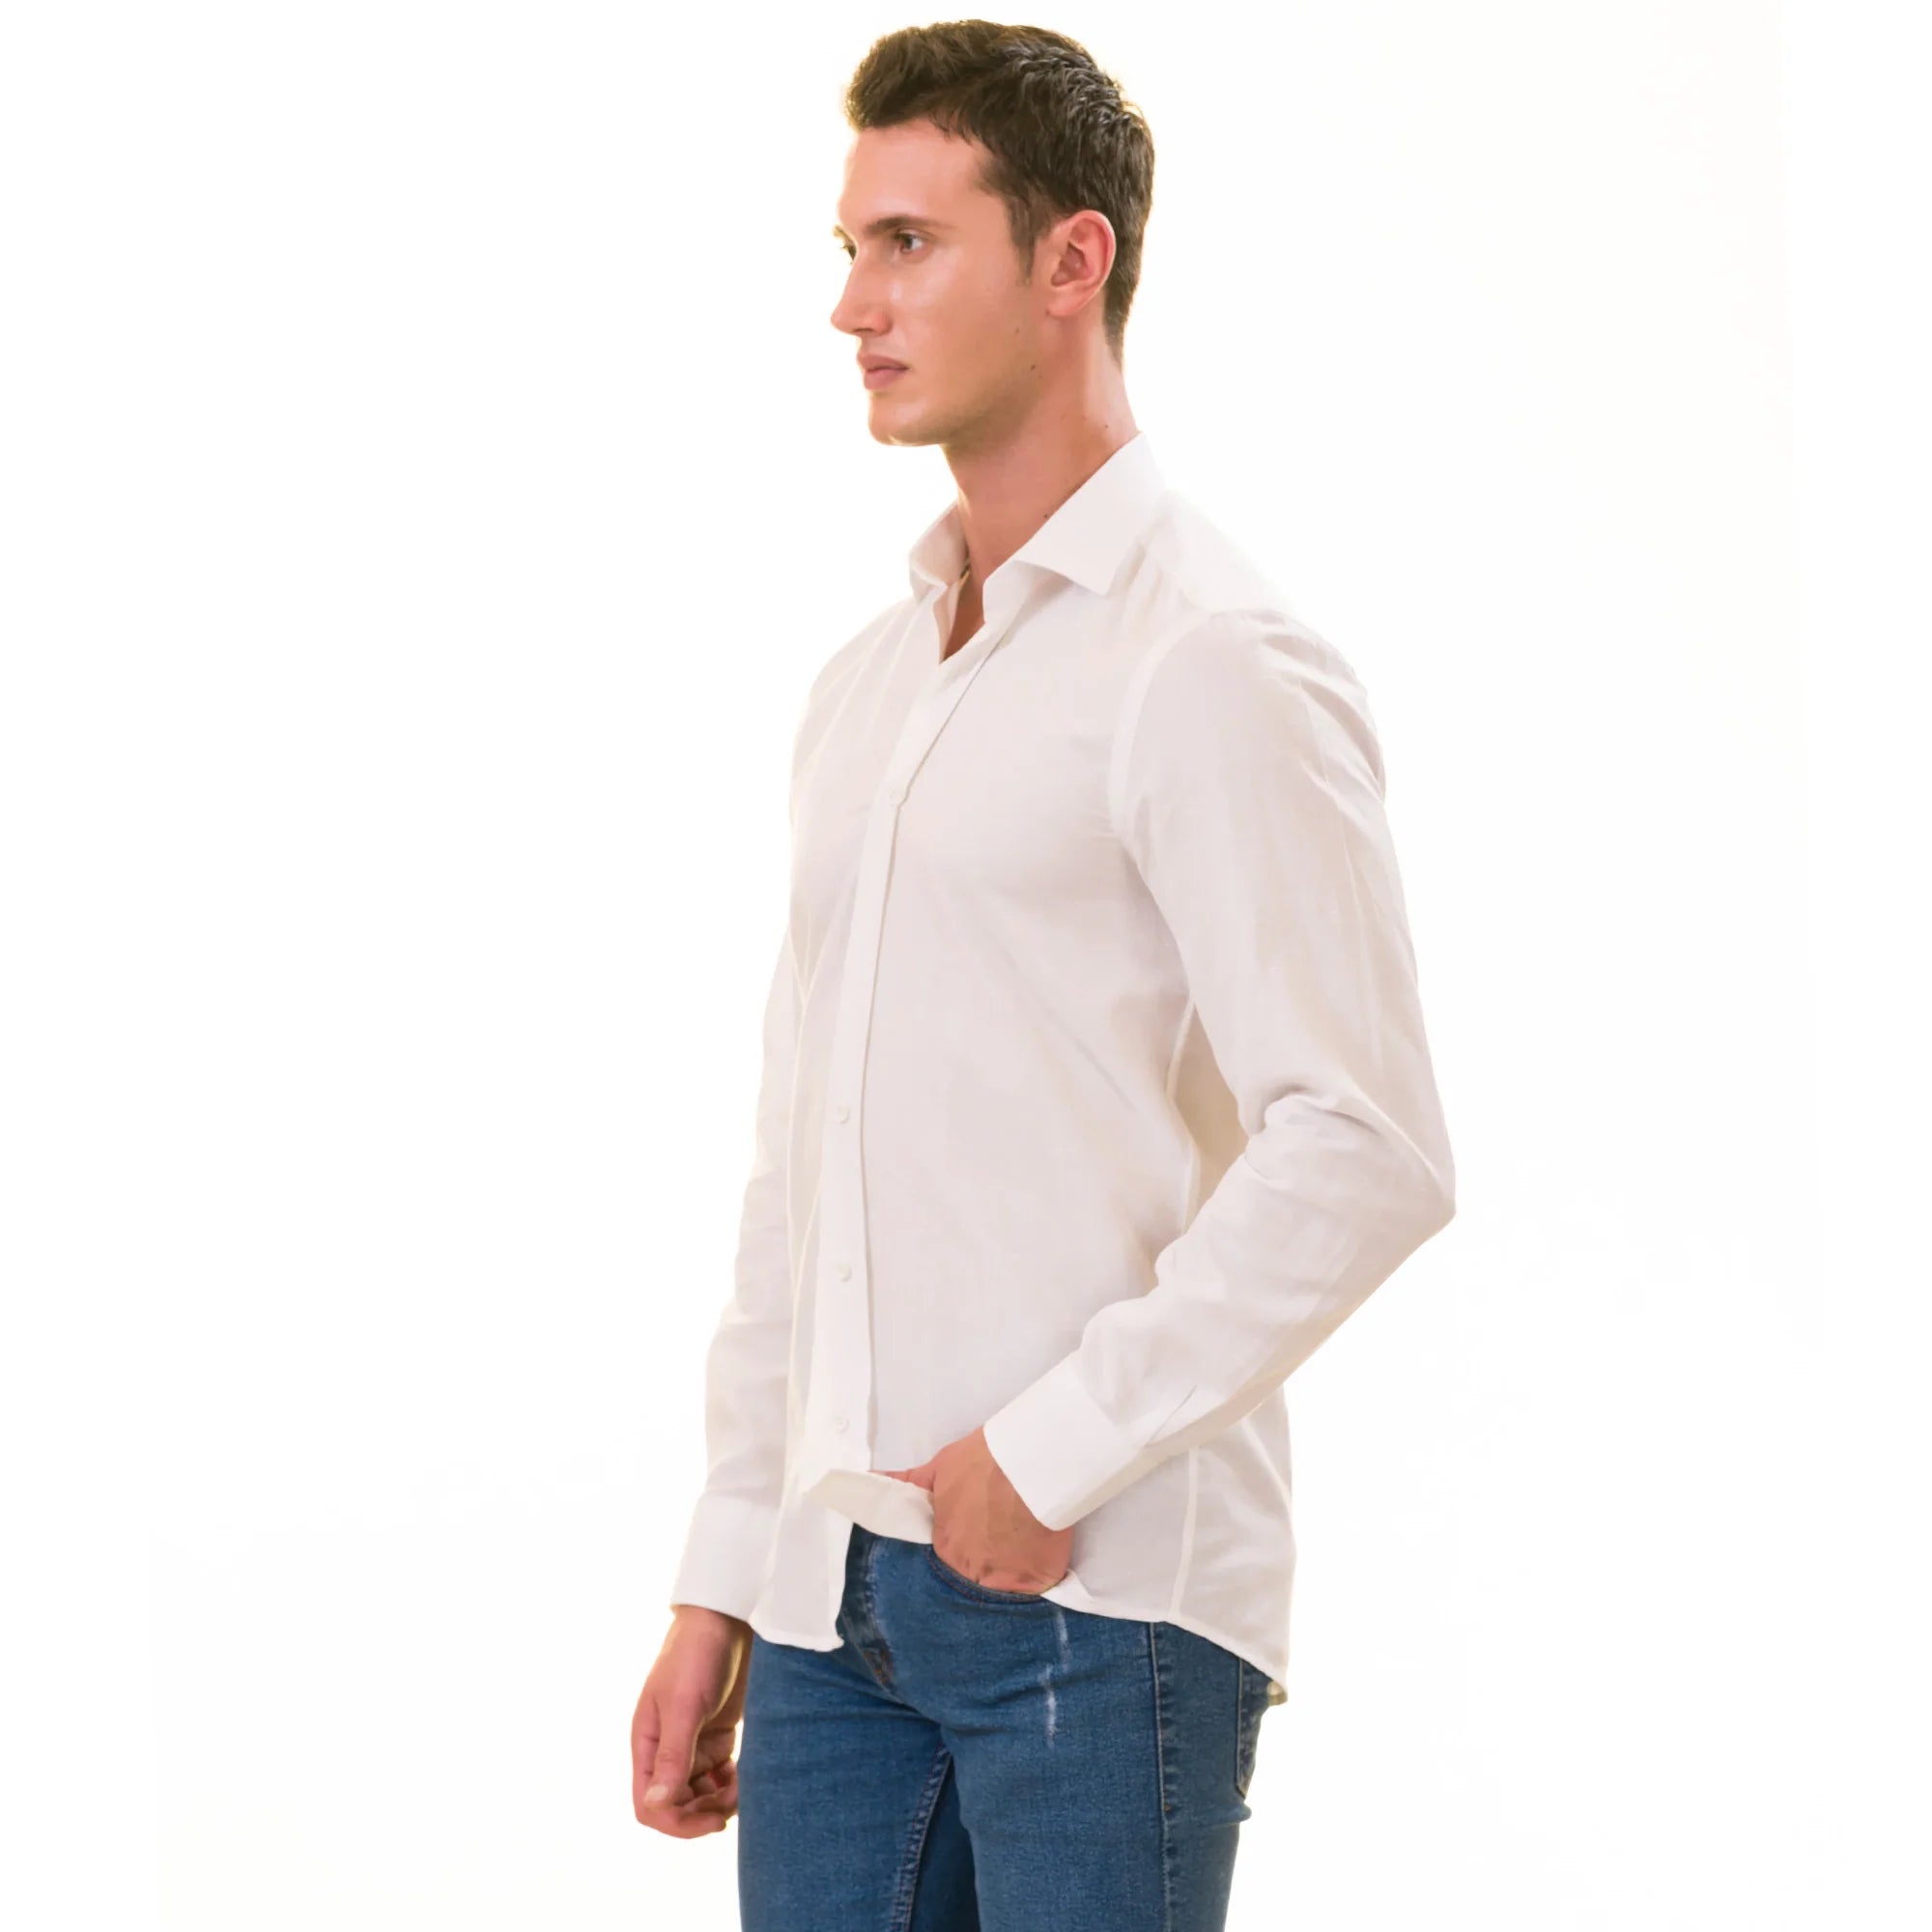 How to Wear Linen Shirt: A Complete Style Guide